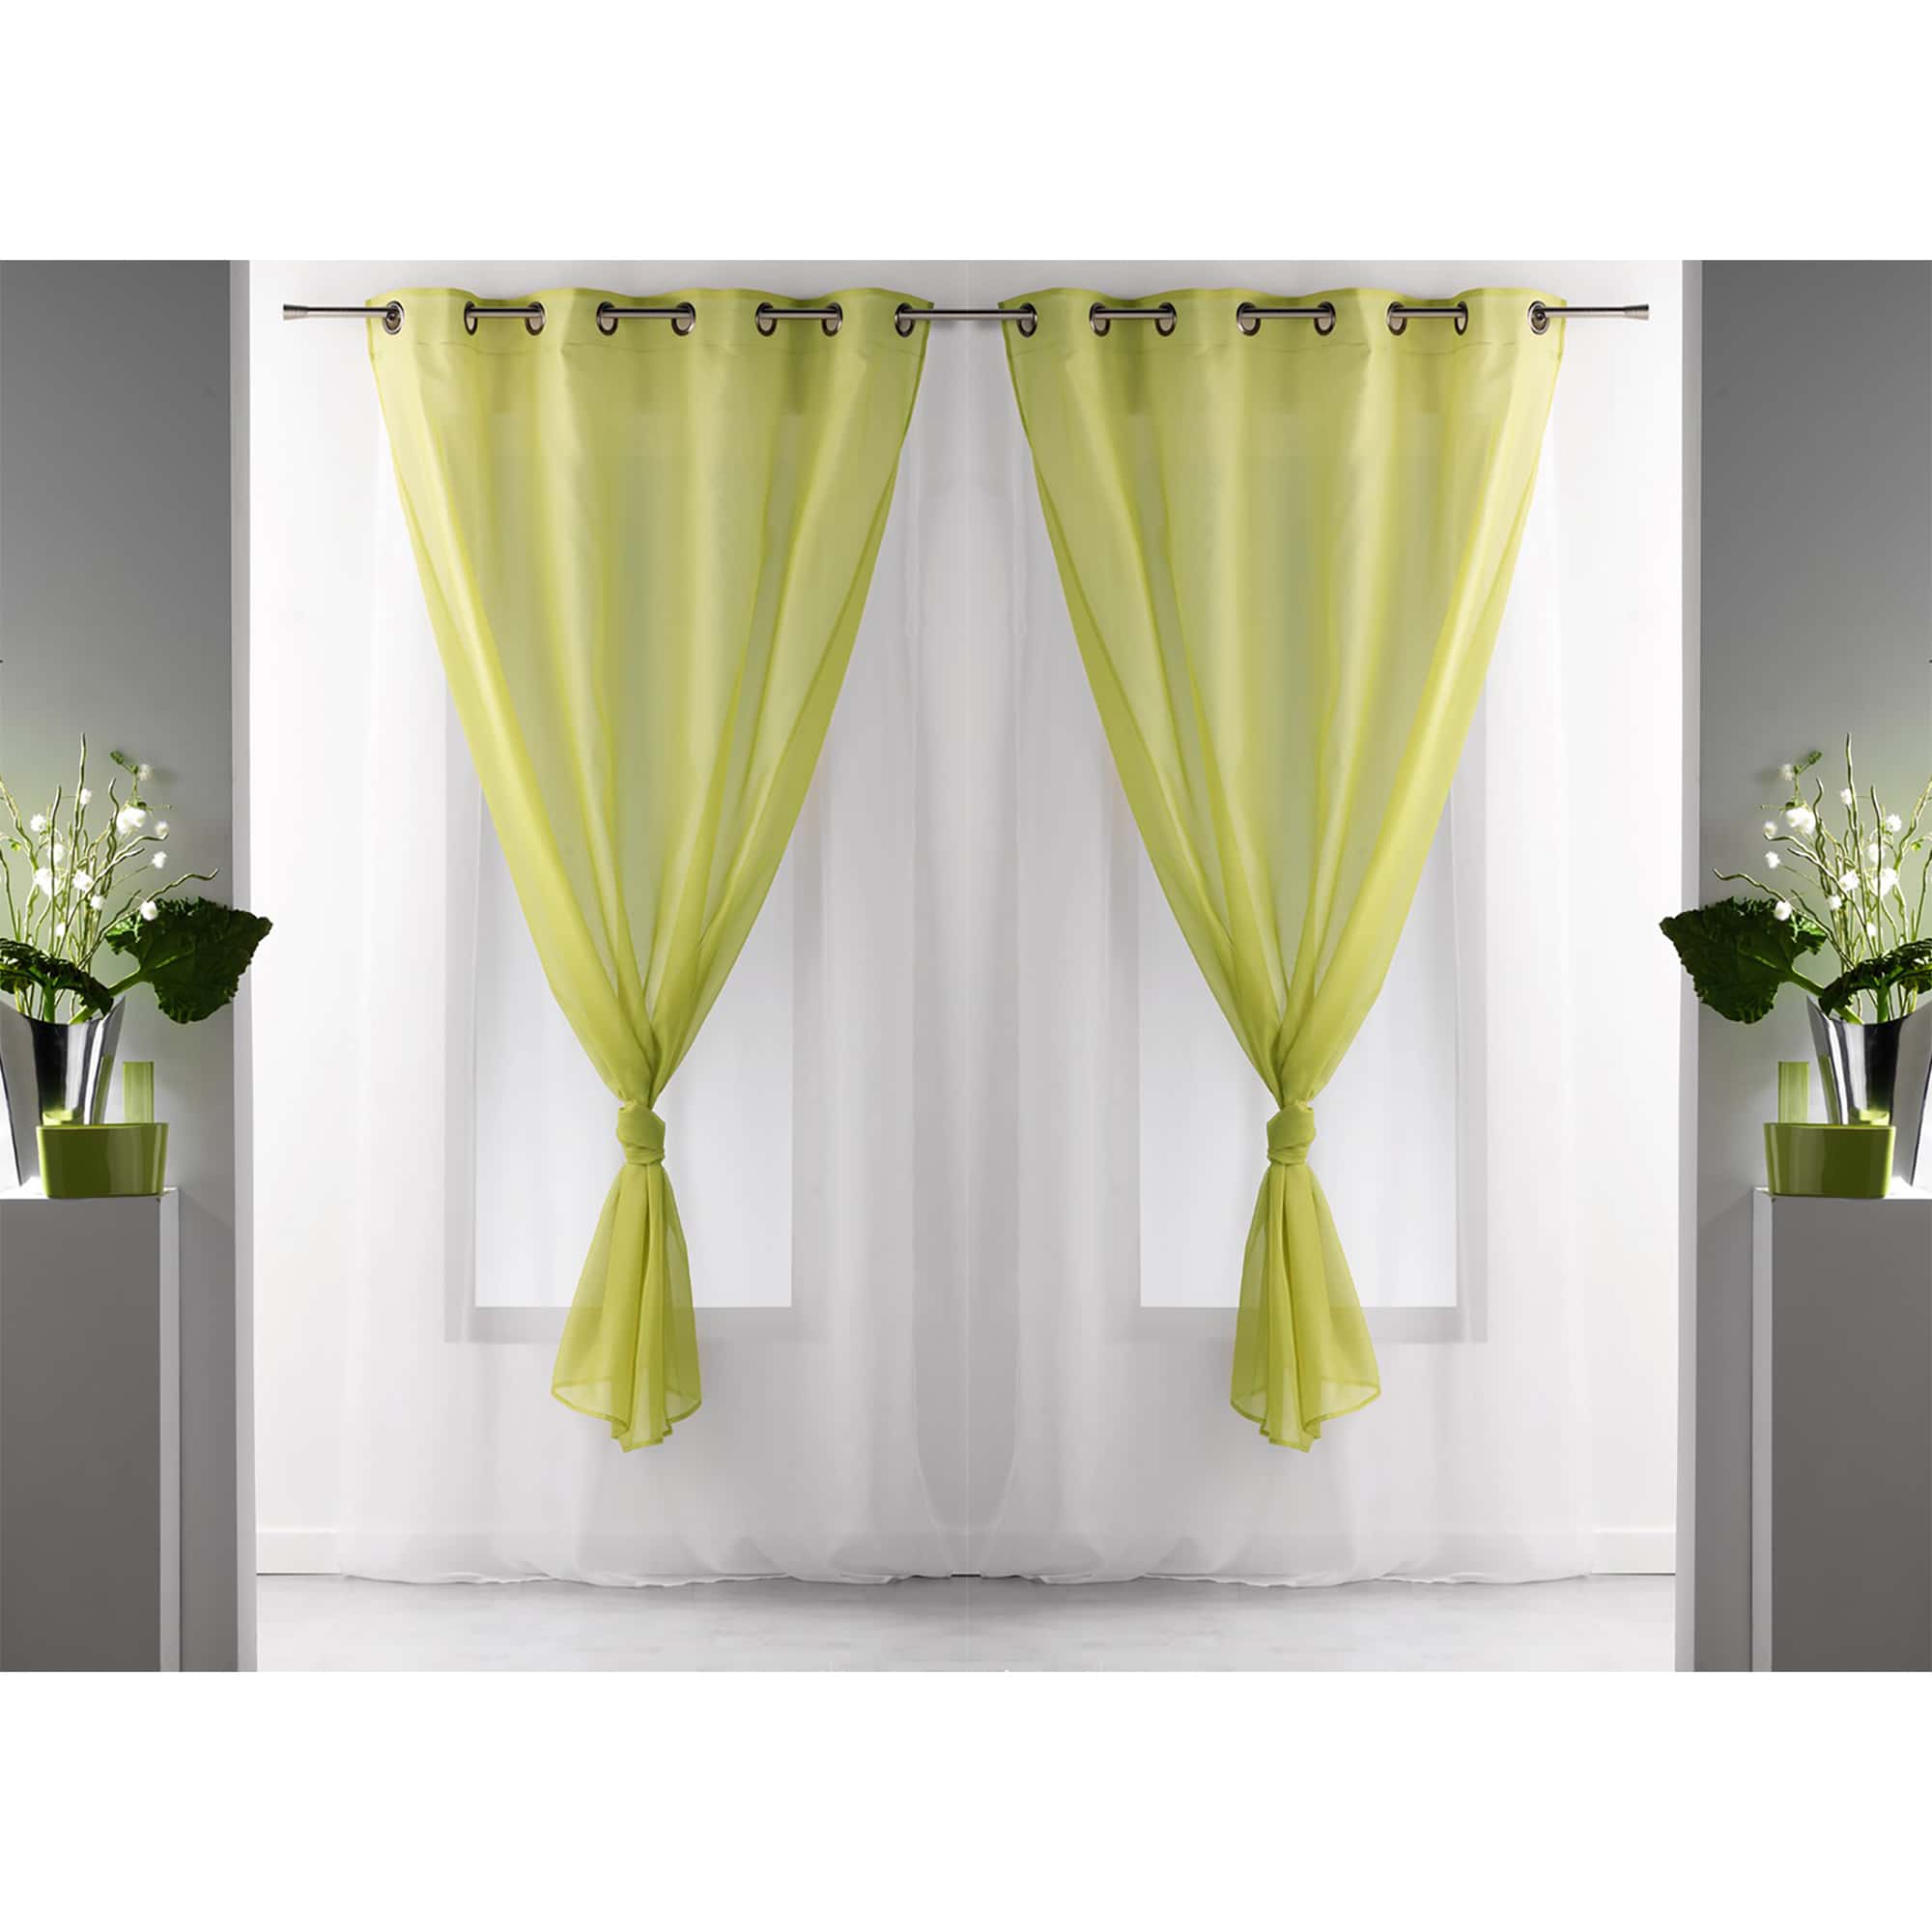 double sheer curtains solid 2 colors green white set of 2 panels for large window